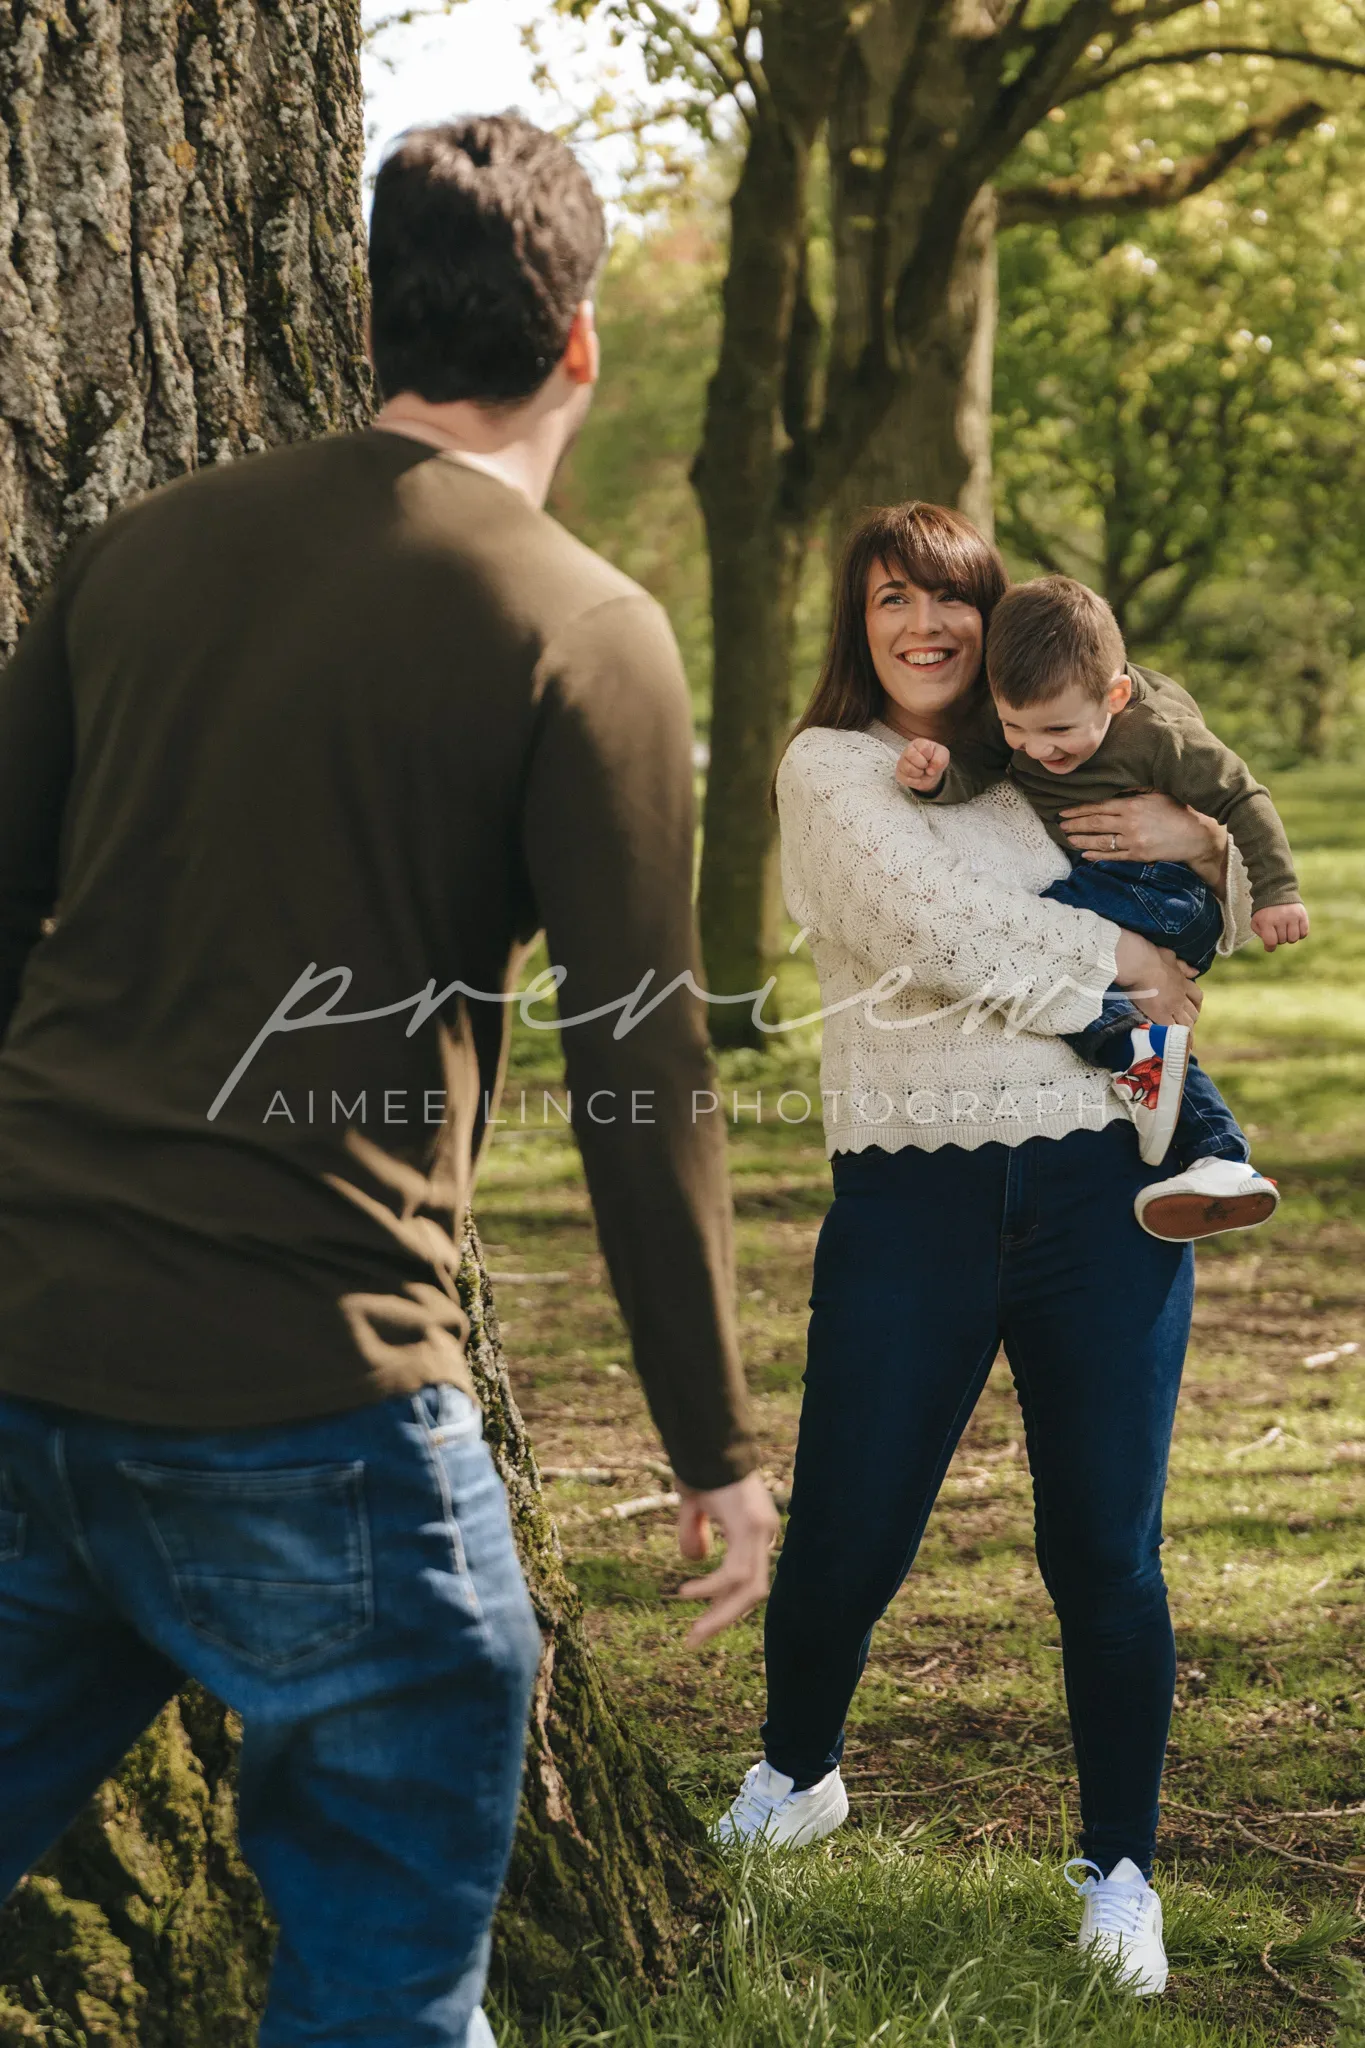 A woman holding a toddler smiles joyously at a man standing foreground in a lush park. the child playfully reaches out toward the man. the scene is bright with sunlight filtering through trees.